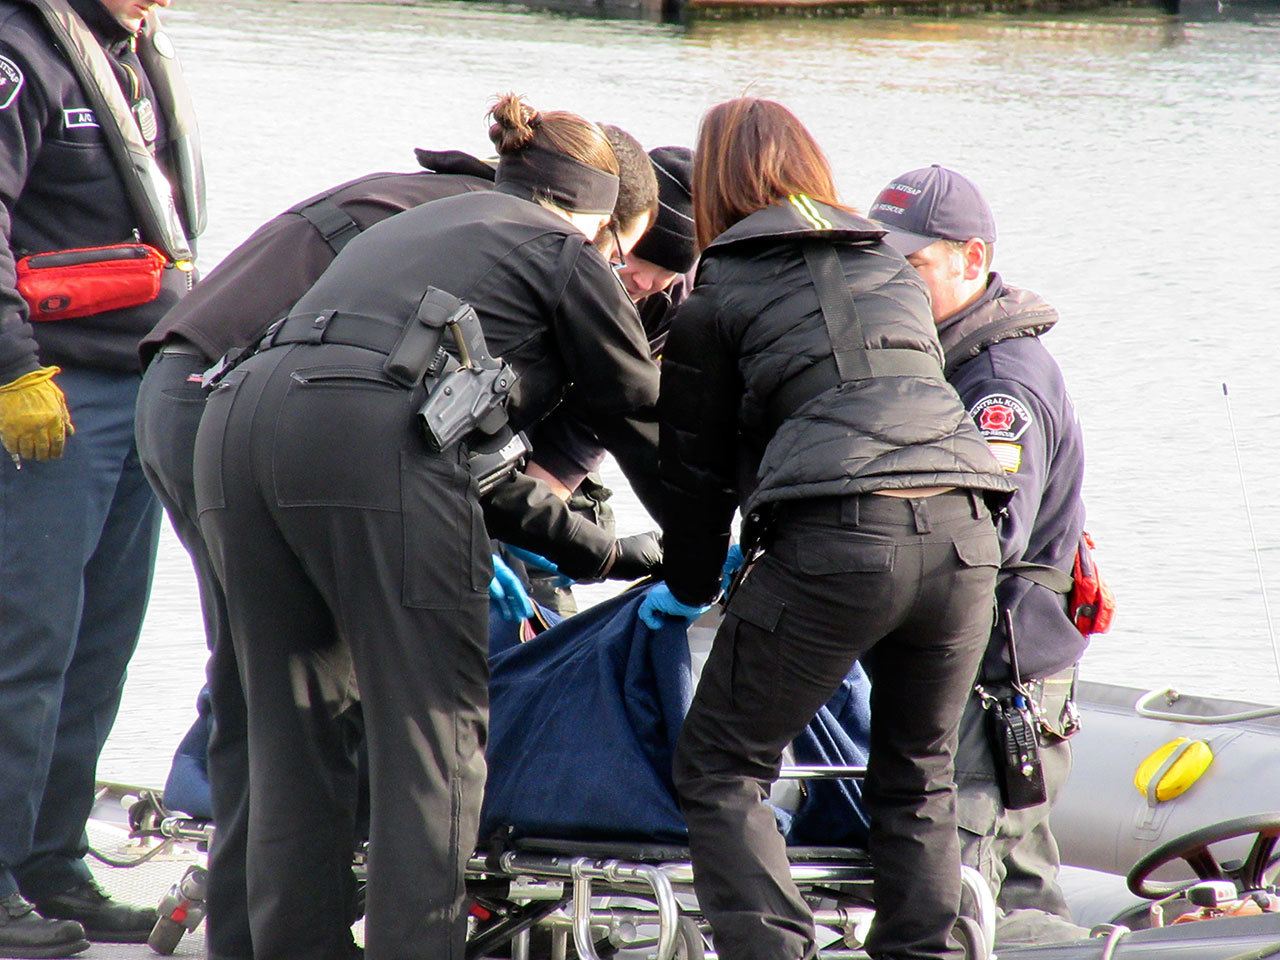 Emergency personnel prepare a person’s body for transport, Dec. 8 at Brownsville Marina. (Terryl Asla/Kitsap News Group)